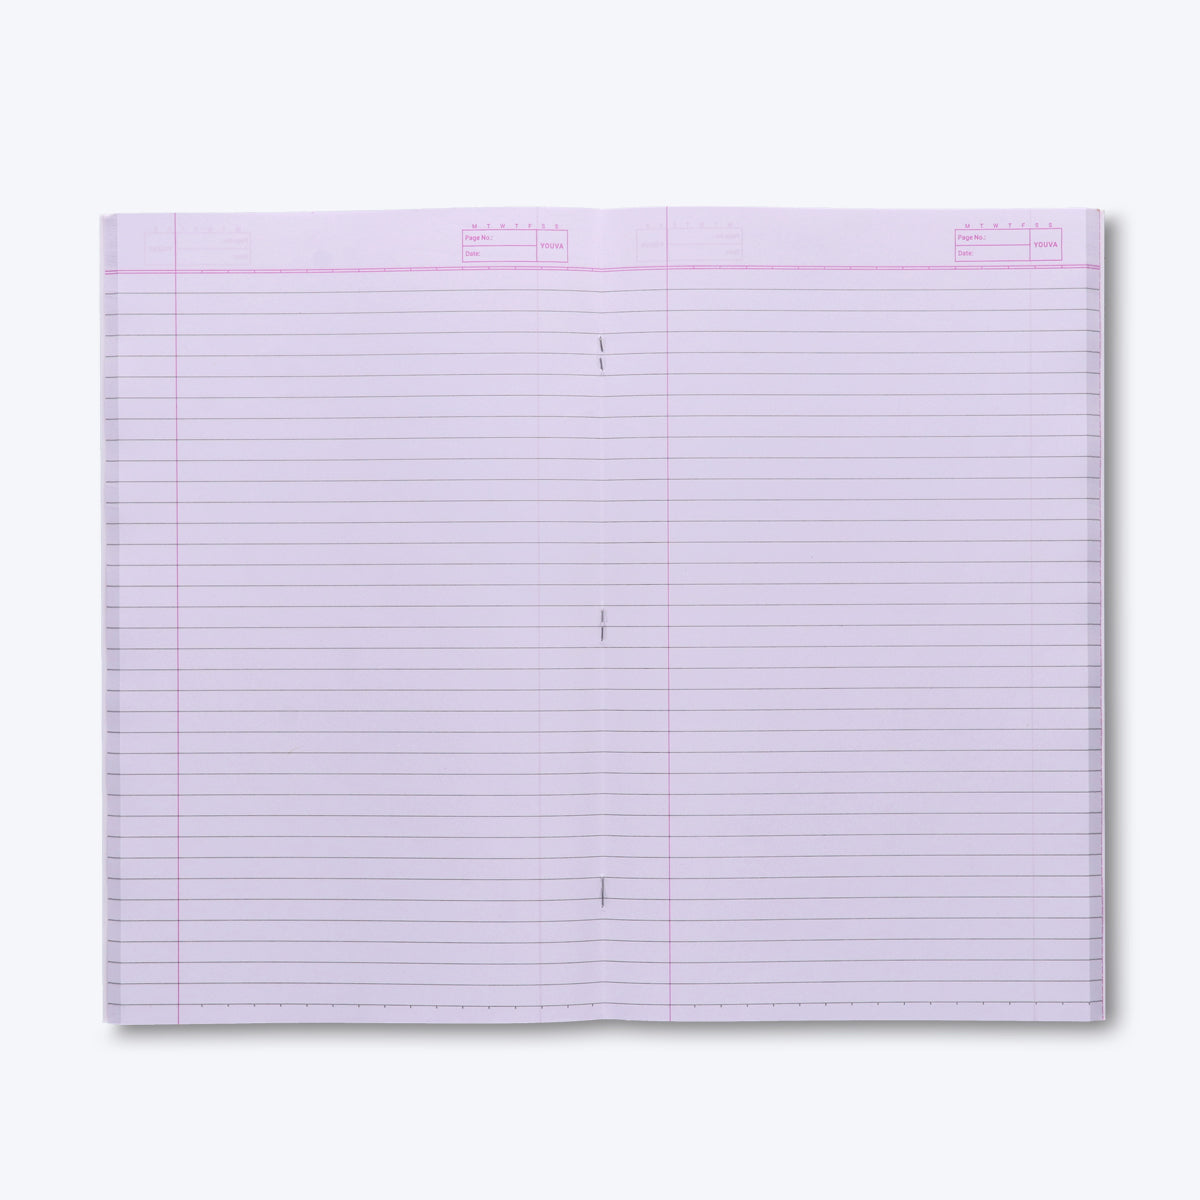 Navneet Youva | Soft Bound Long Book for Students and Office Executives | King Size- 19 cm x 31 cm | Single Line | 92 Pages